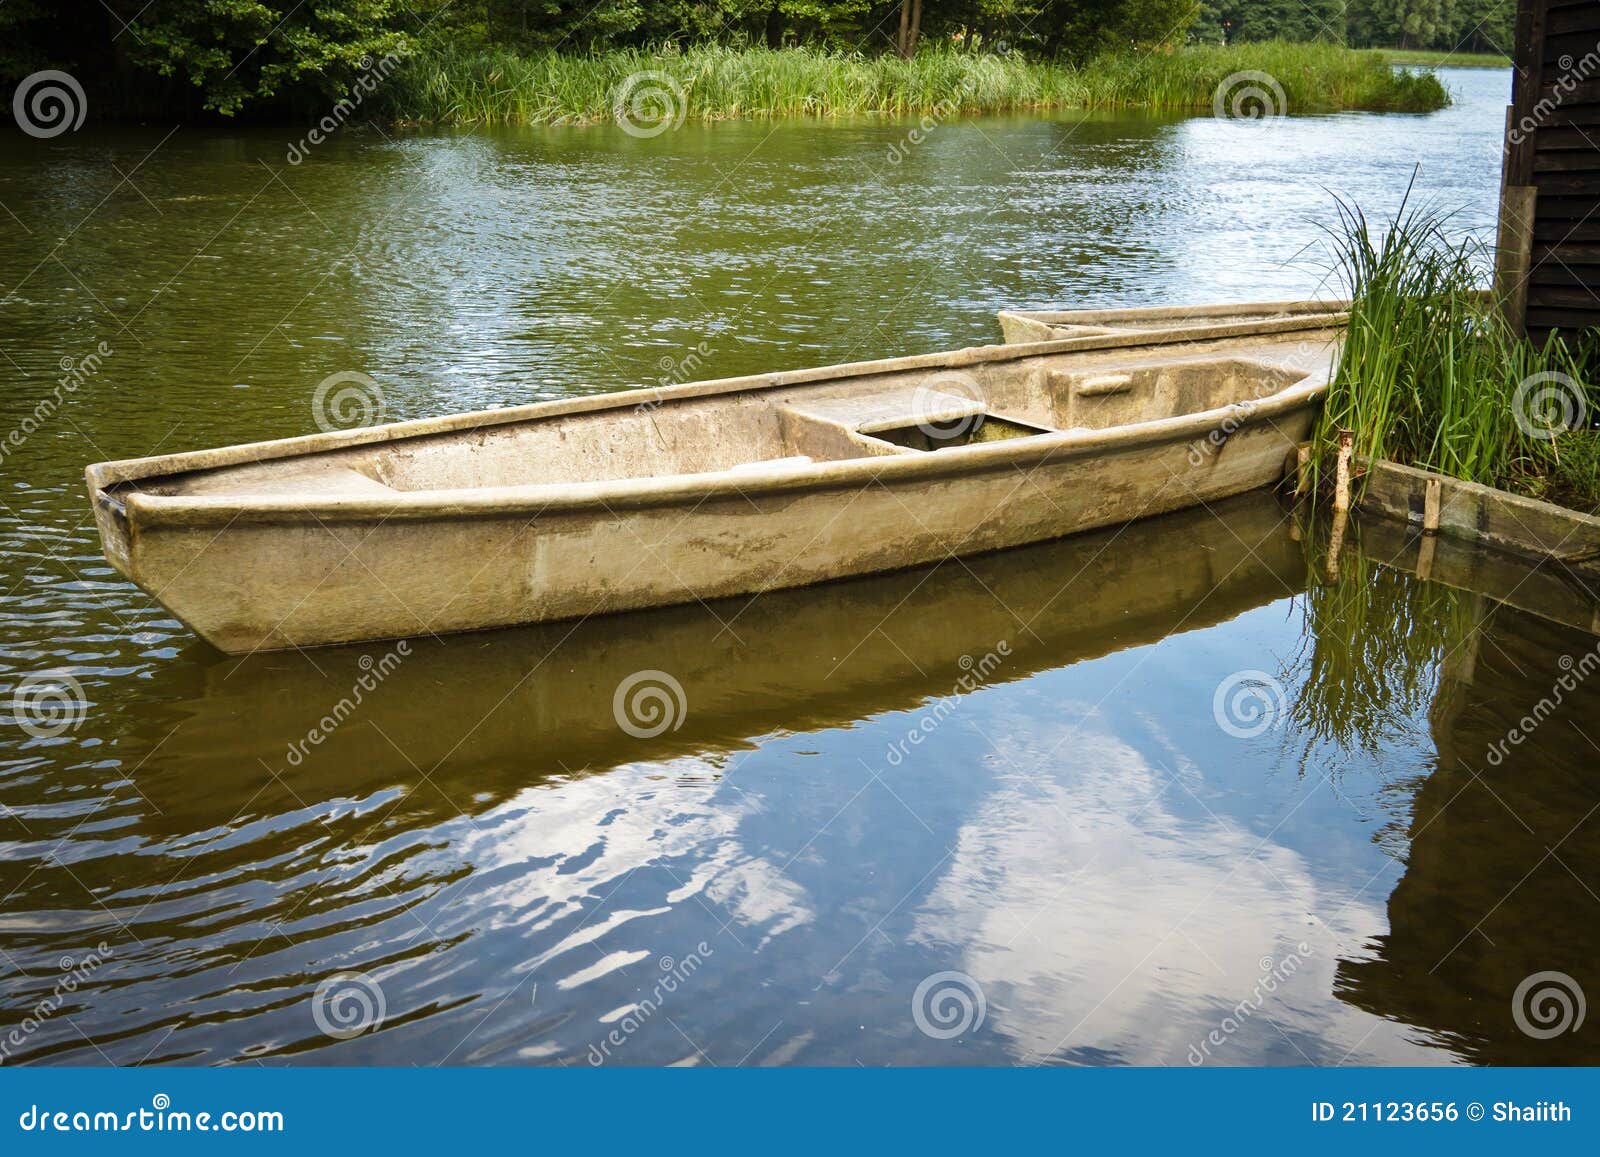 vintage fishing boat in the lake royalty free stock image